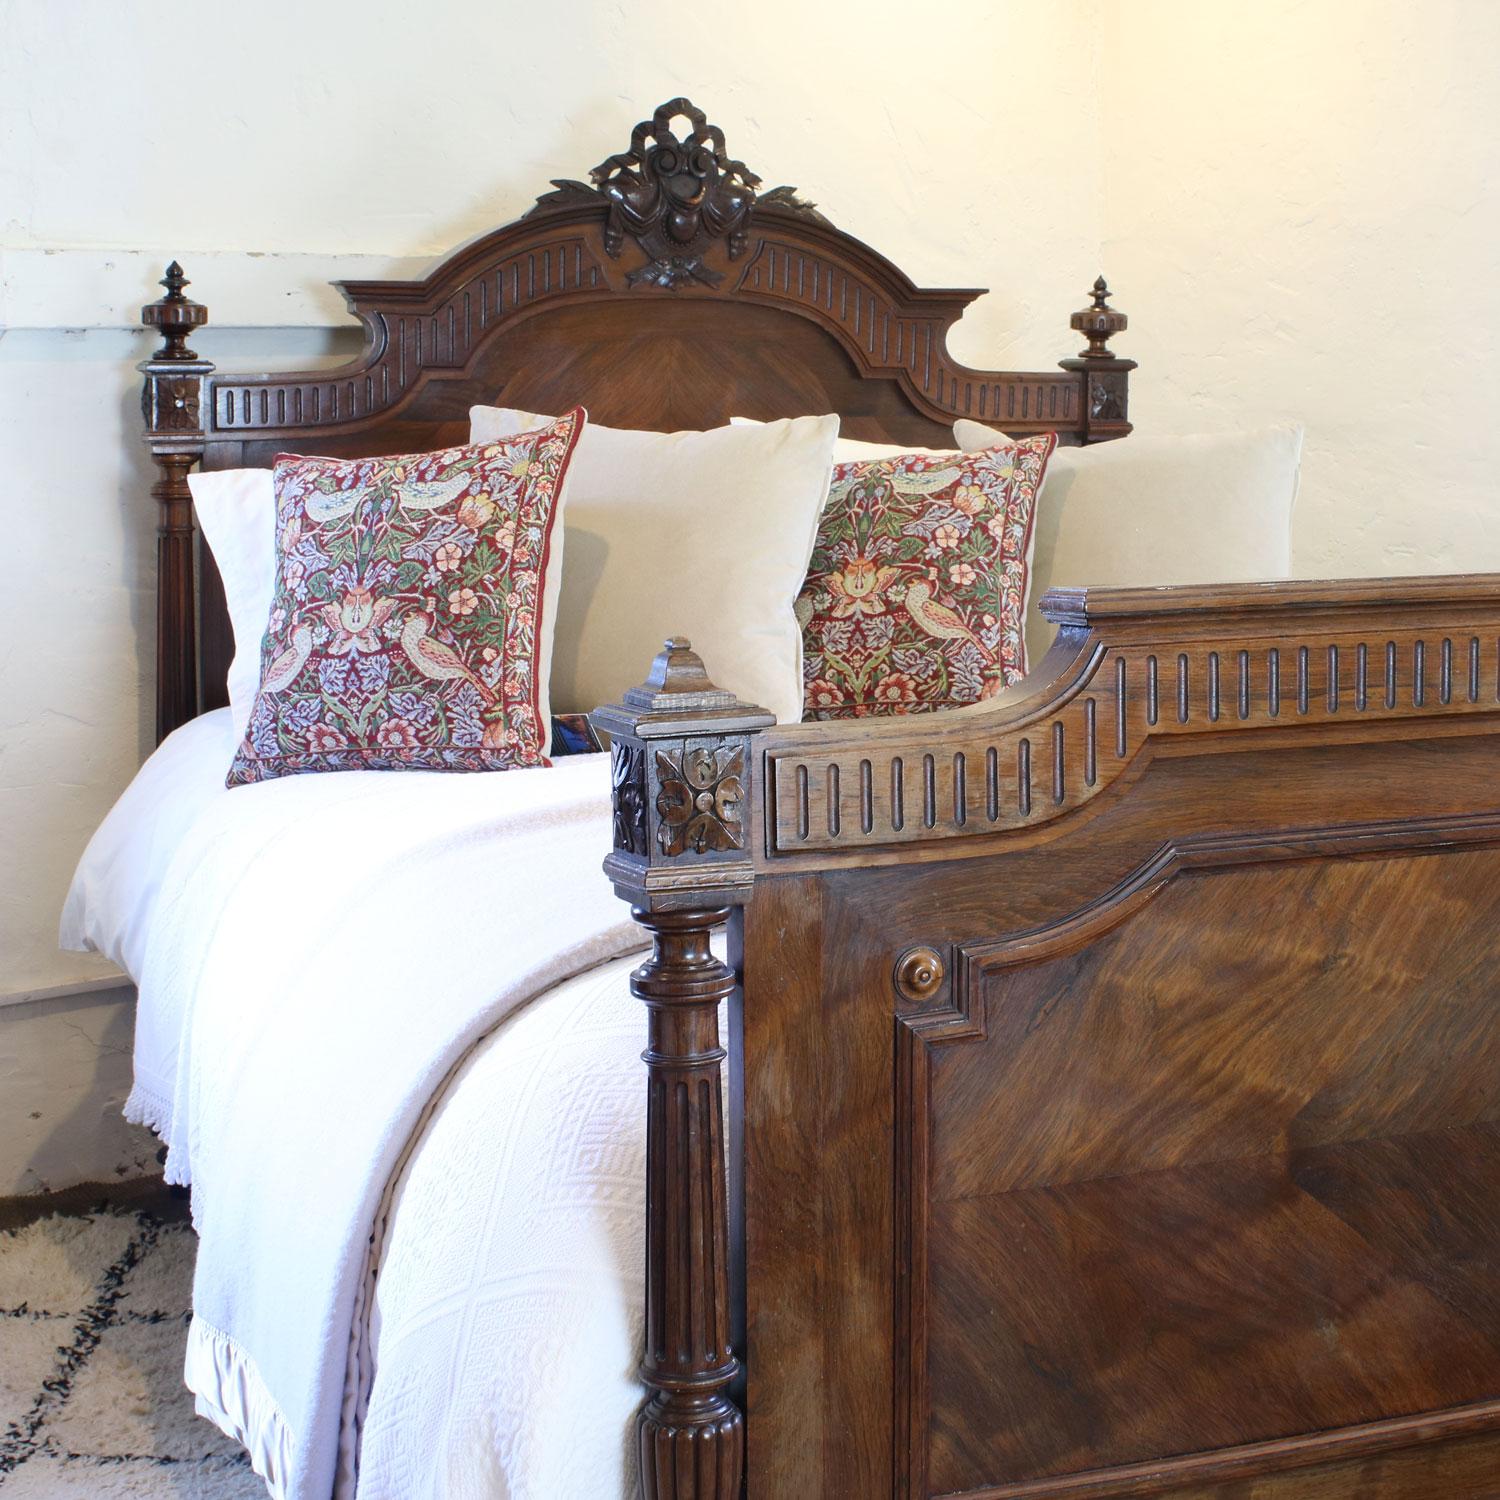 A Renaissance style bedstead with decoratively carved head mount and tapered and fluted posts. 

This bed accepts a British king size or American queen size, 5ft wide (60 inches or 150cm) base and mattress set.

The price includes a firm bed